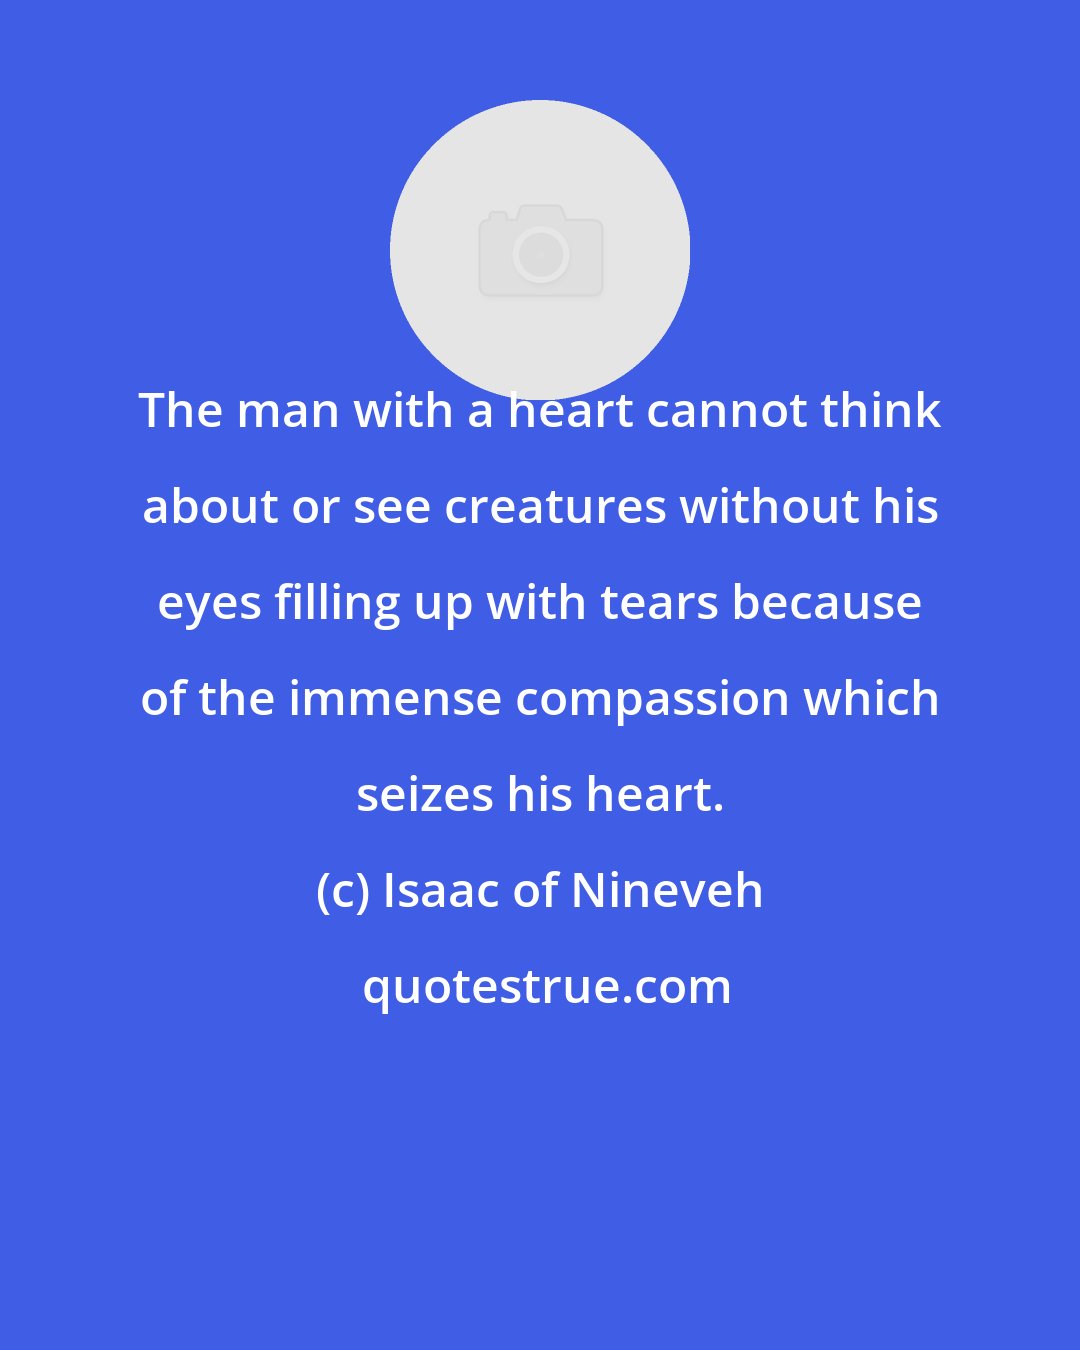 Isaac of Nineveh: The man with a heart cannot think about or see creatures without his eyes filling up with tears because of the immense compassion which seizes his heart.